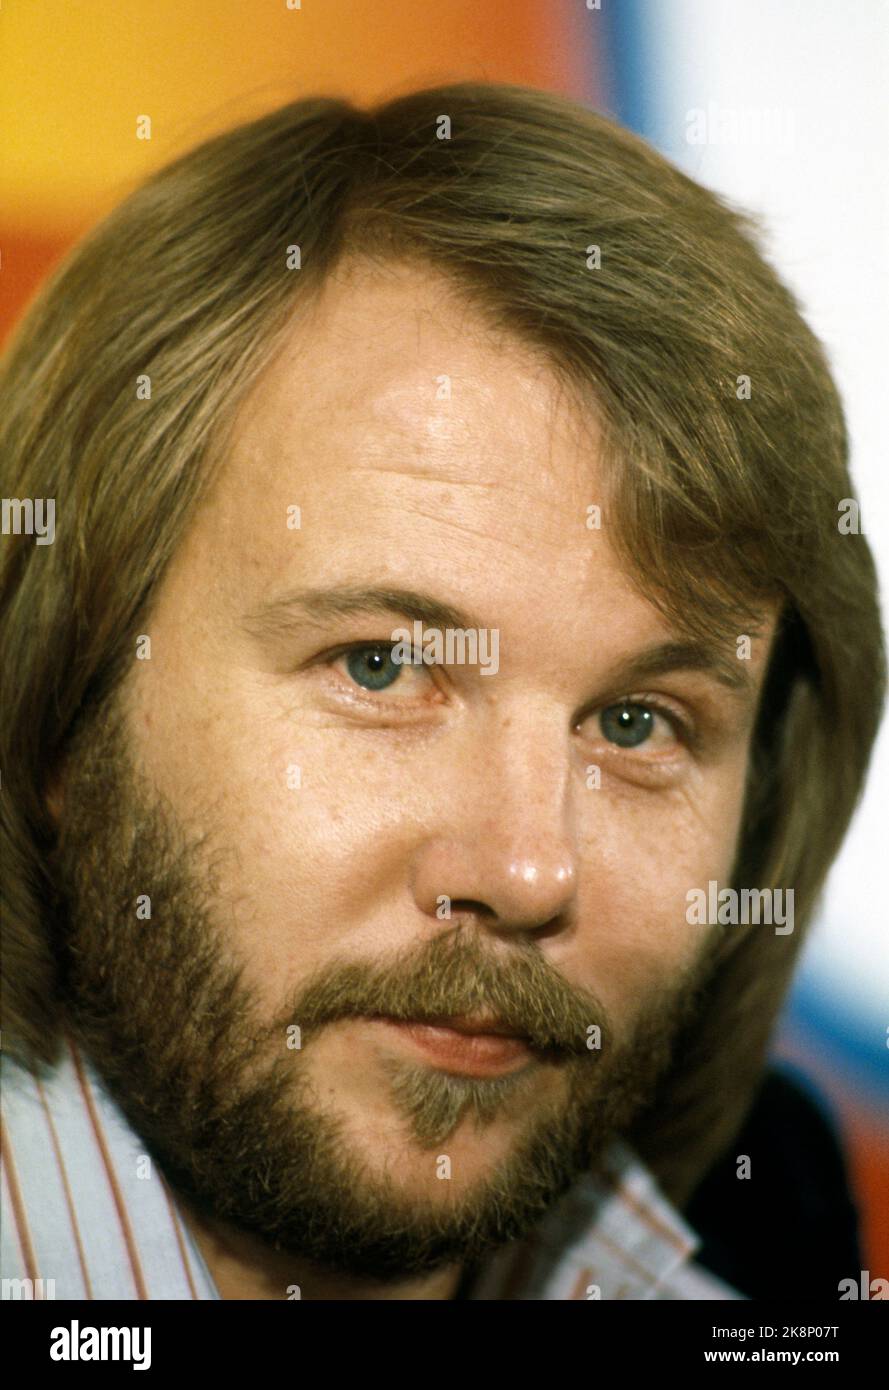 Oslo 19761008. Benny Andersson, member of the pop group ABBA, portrait. Photo Oddvar Walle Jensen / NTB / NTB Stock Photo